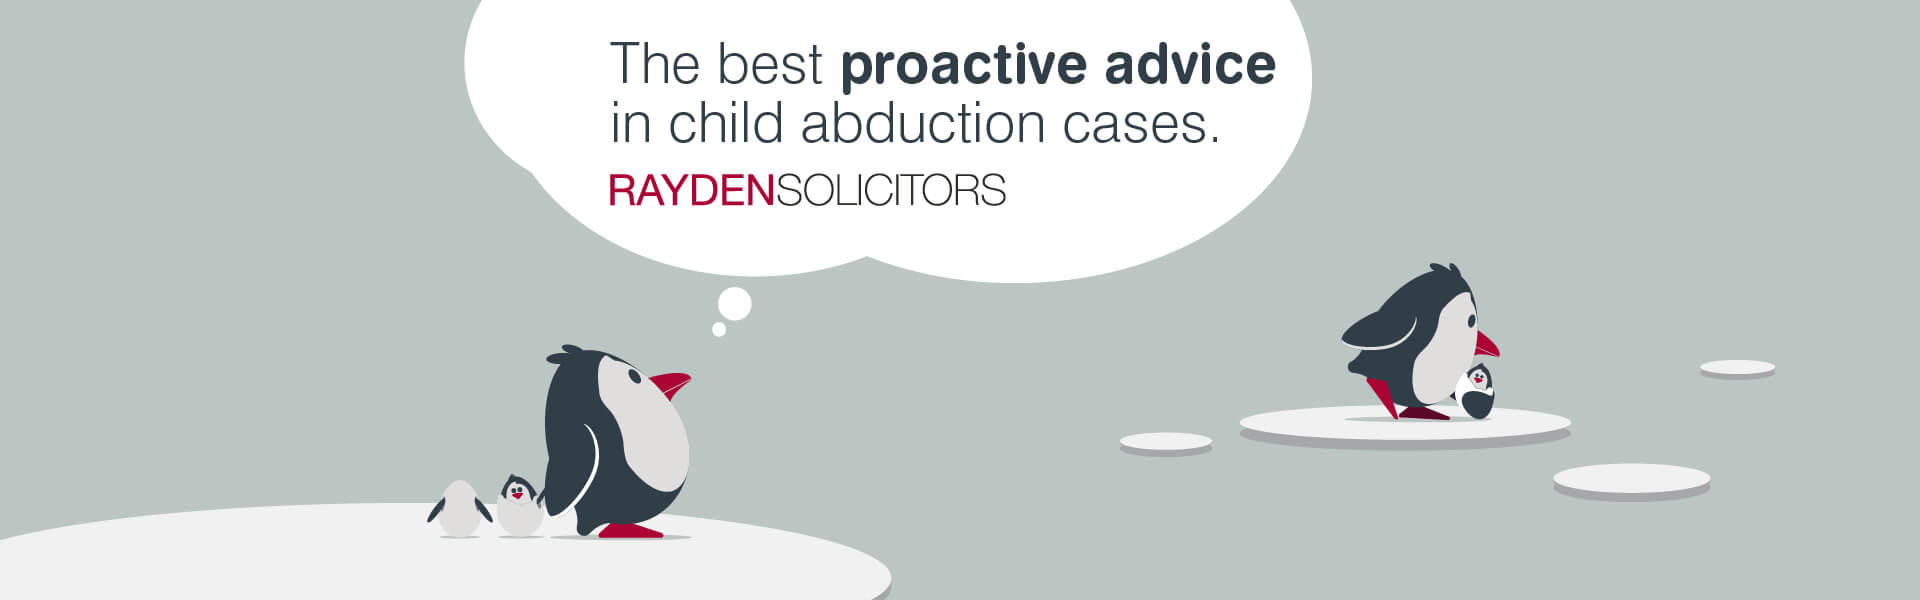 The best proactive advice in child abduction cases